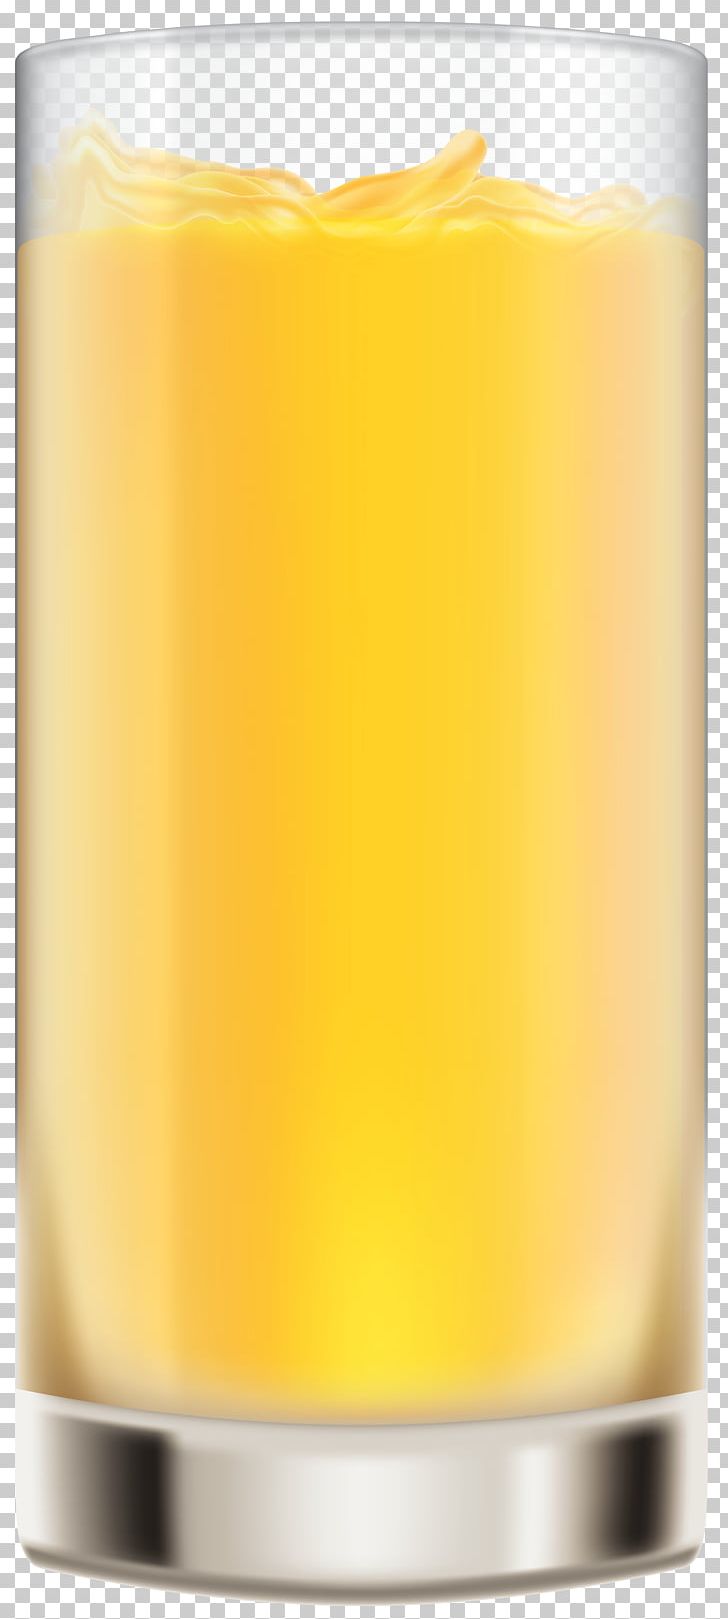 Orange Juice Flameless Candles Wax PNG, Clipart, Art, Candle, Flameless Candle, Flameless Candles, Harvey Wallbanger Free PNG Download